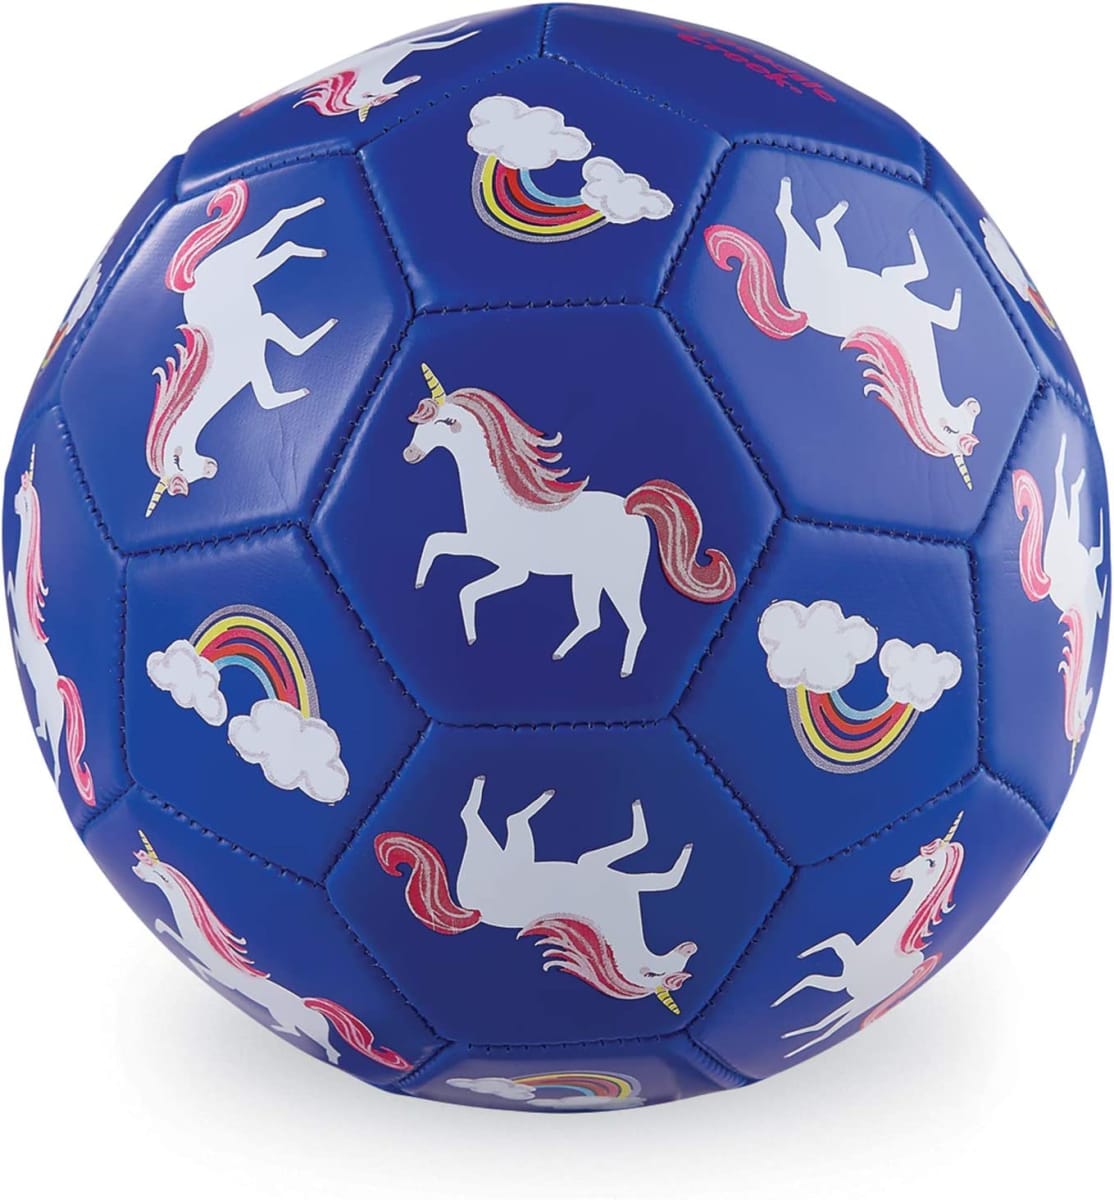 Unicorn Kids Soccer Ball Size 3 - Ships Inflated, Durable Outdoor Toy for Active Play and Beginner Sports